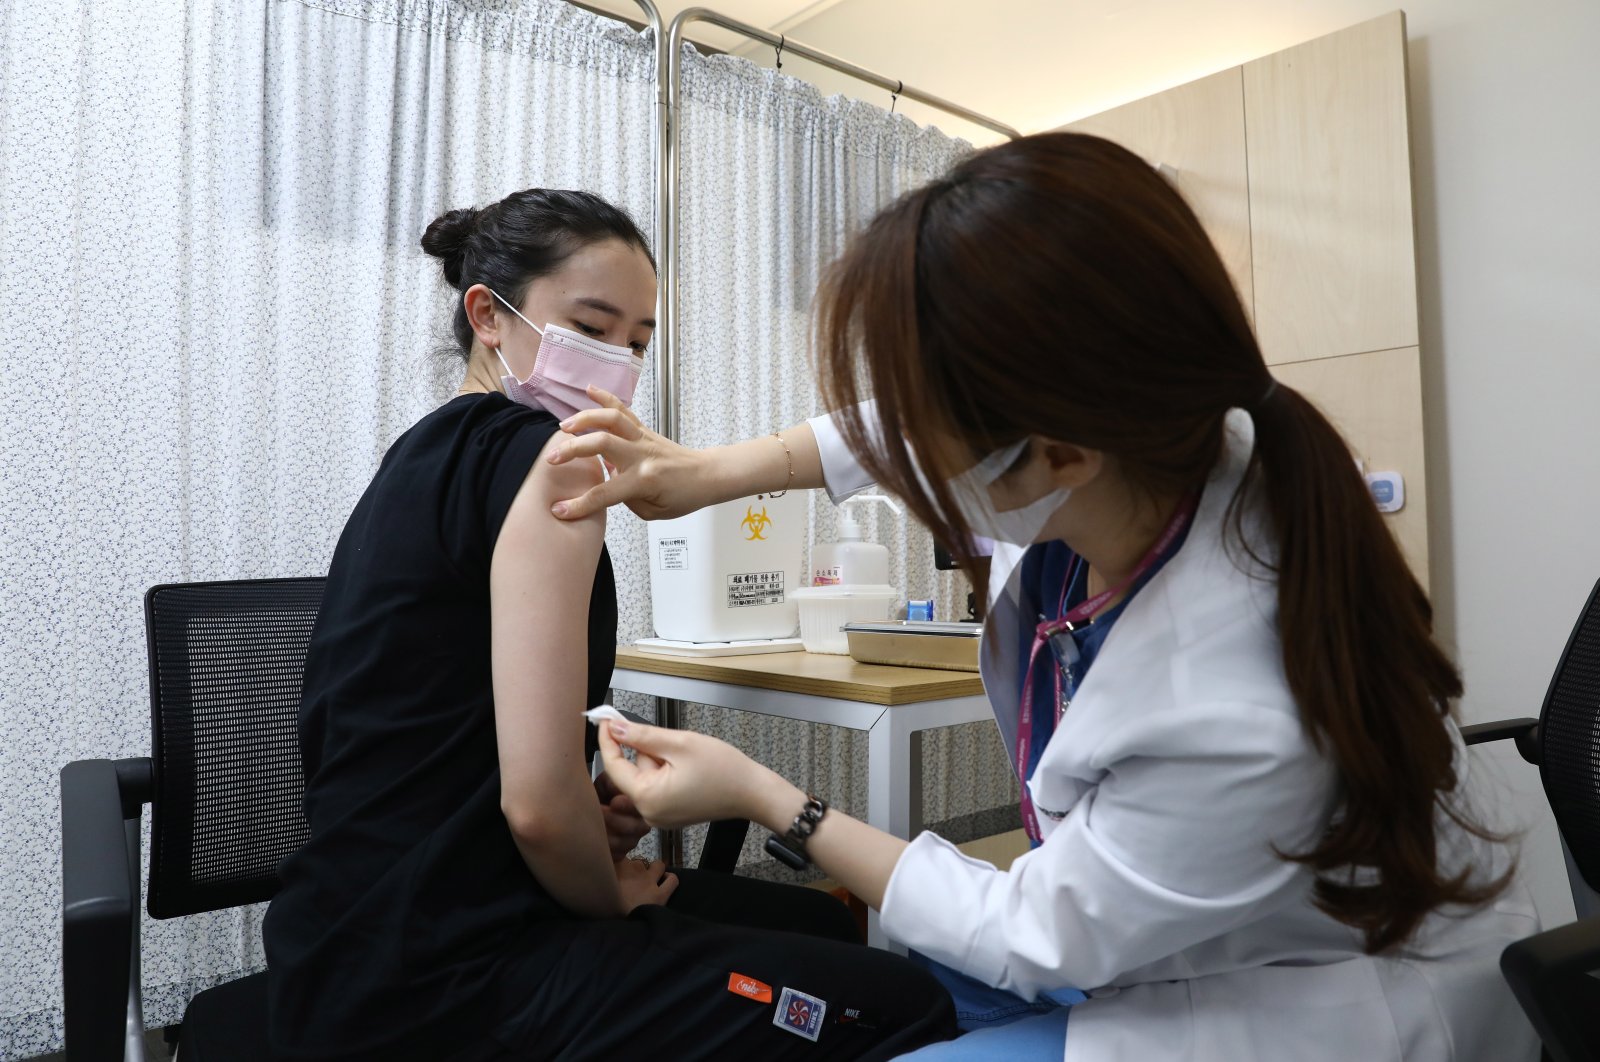 South Korean Olympic table tennis team player Jeon Ji-hee receives the first dose of the Pfizer-BioNTech COVID-19 vaccine at the National Medical Center in Seoul, South Korea, April 29, 2021. (EPA Photo)